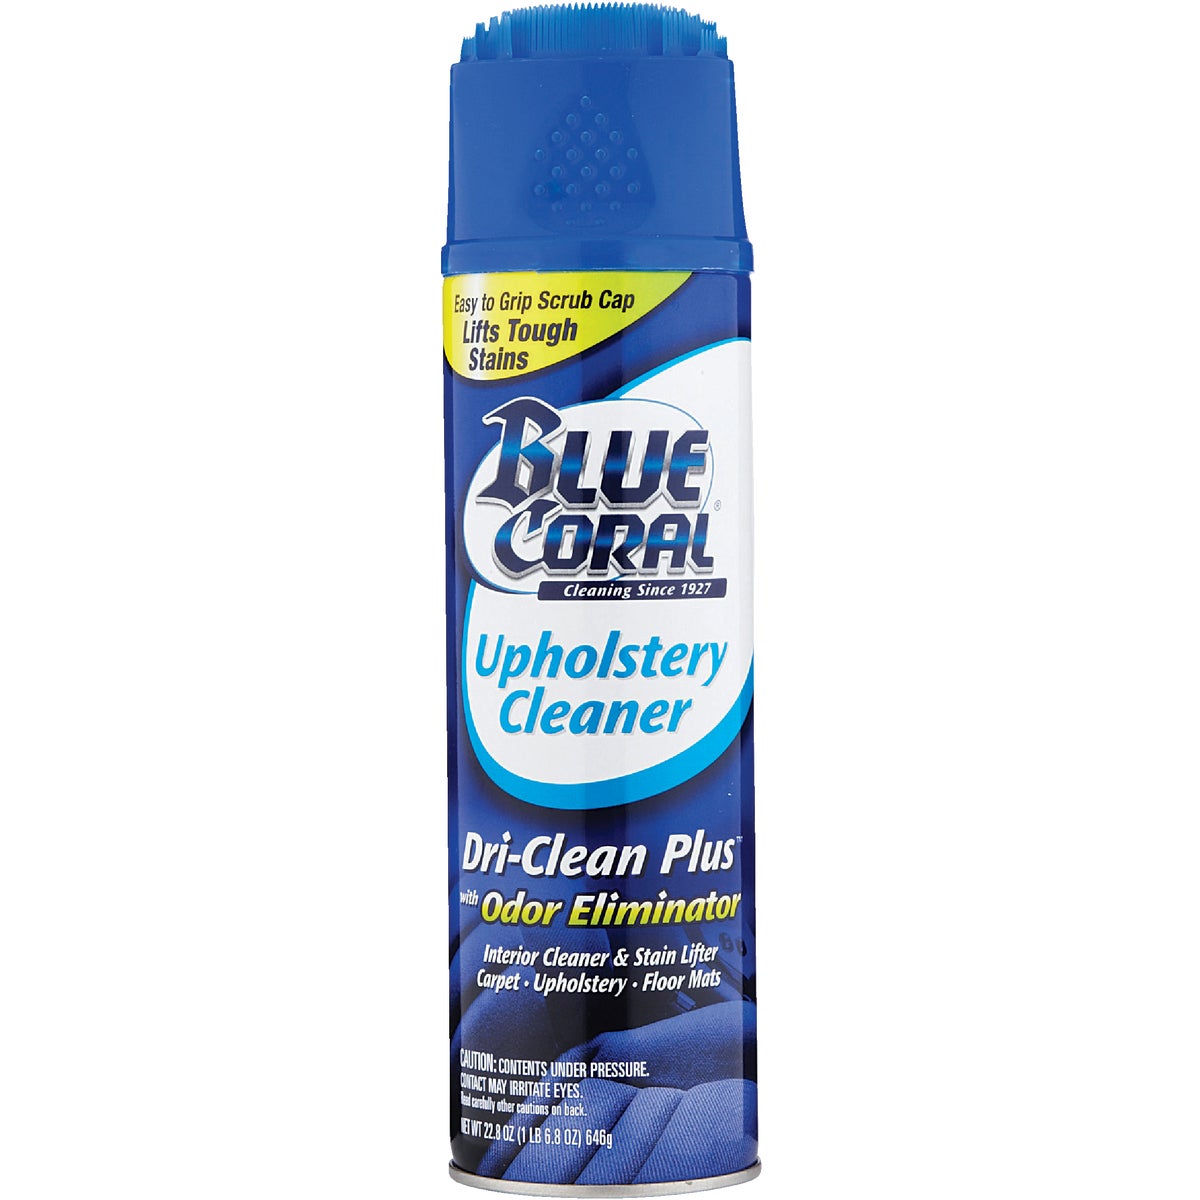 Blue Coral Dry-Clean Plus 23 Oz. Upholstery Cleaner